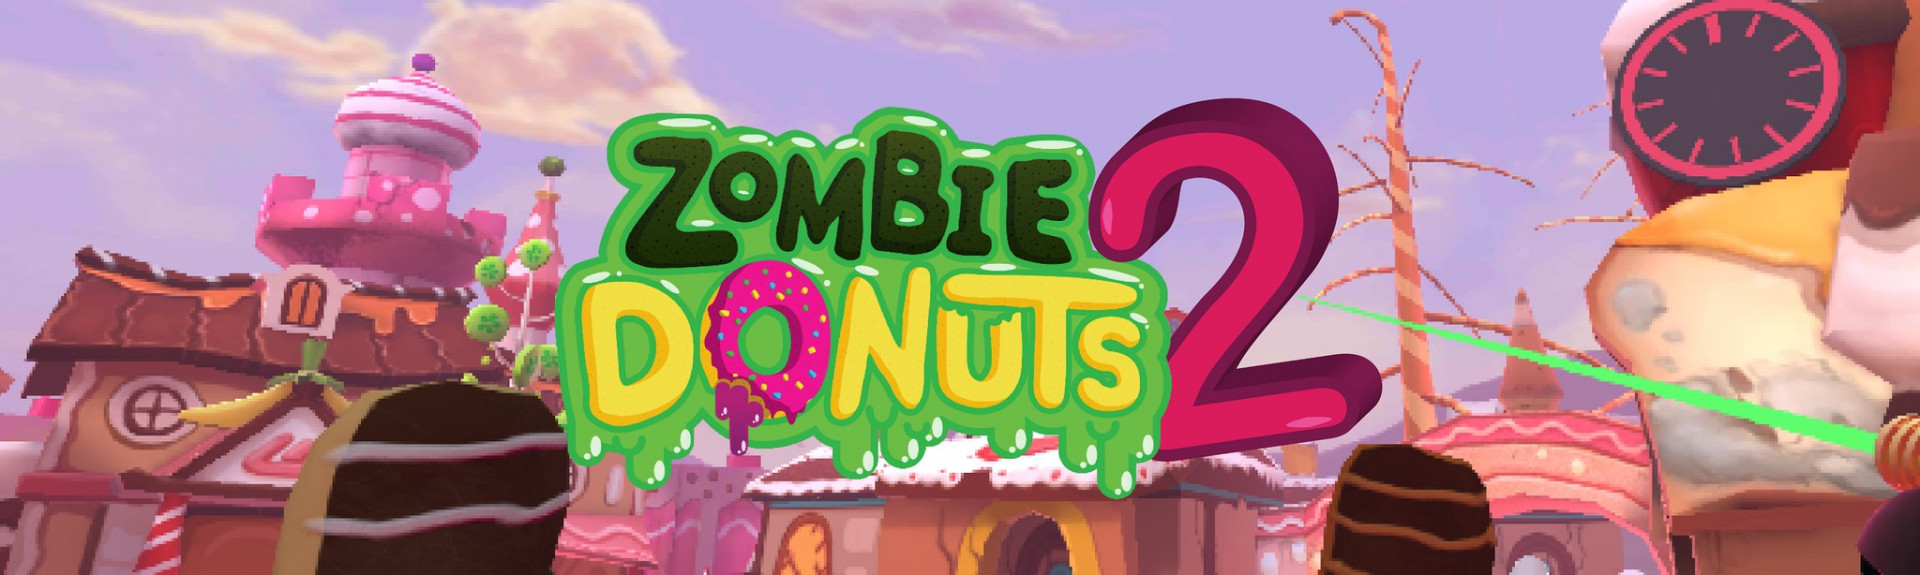 Zombie Donuts 2